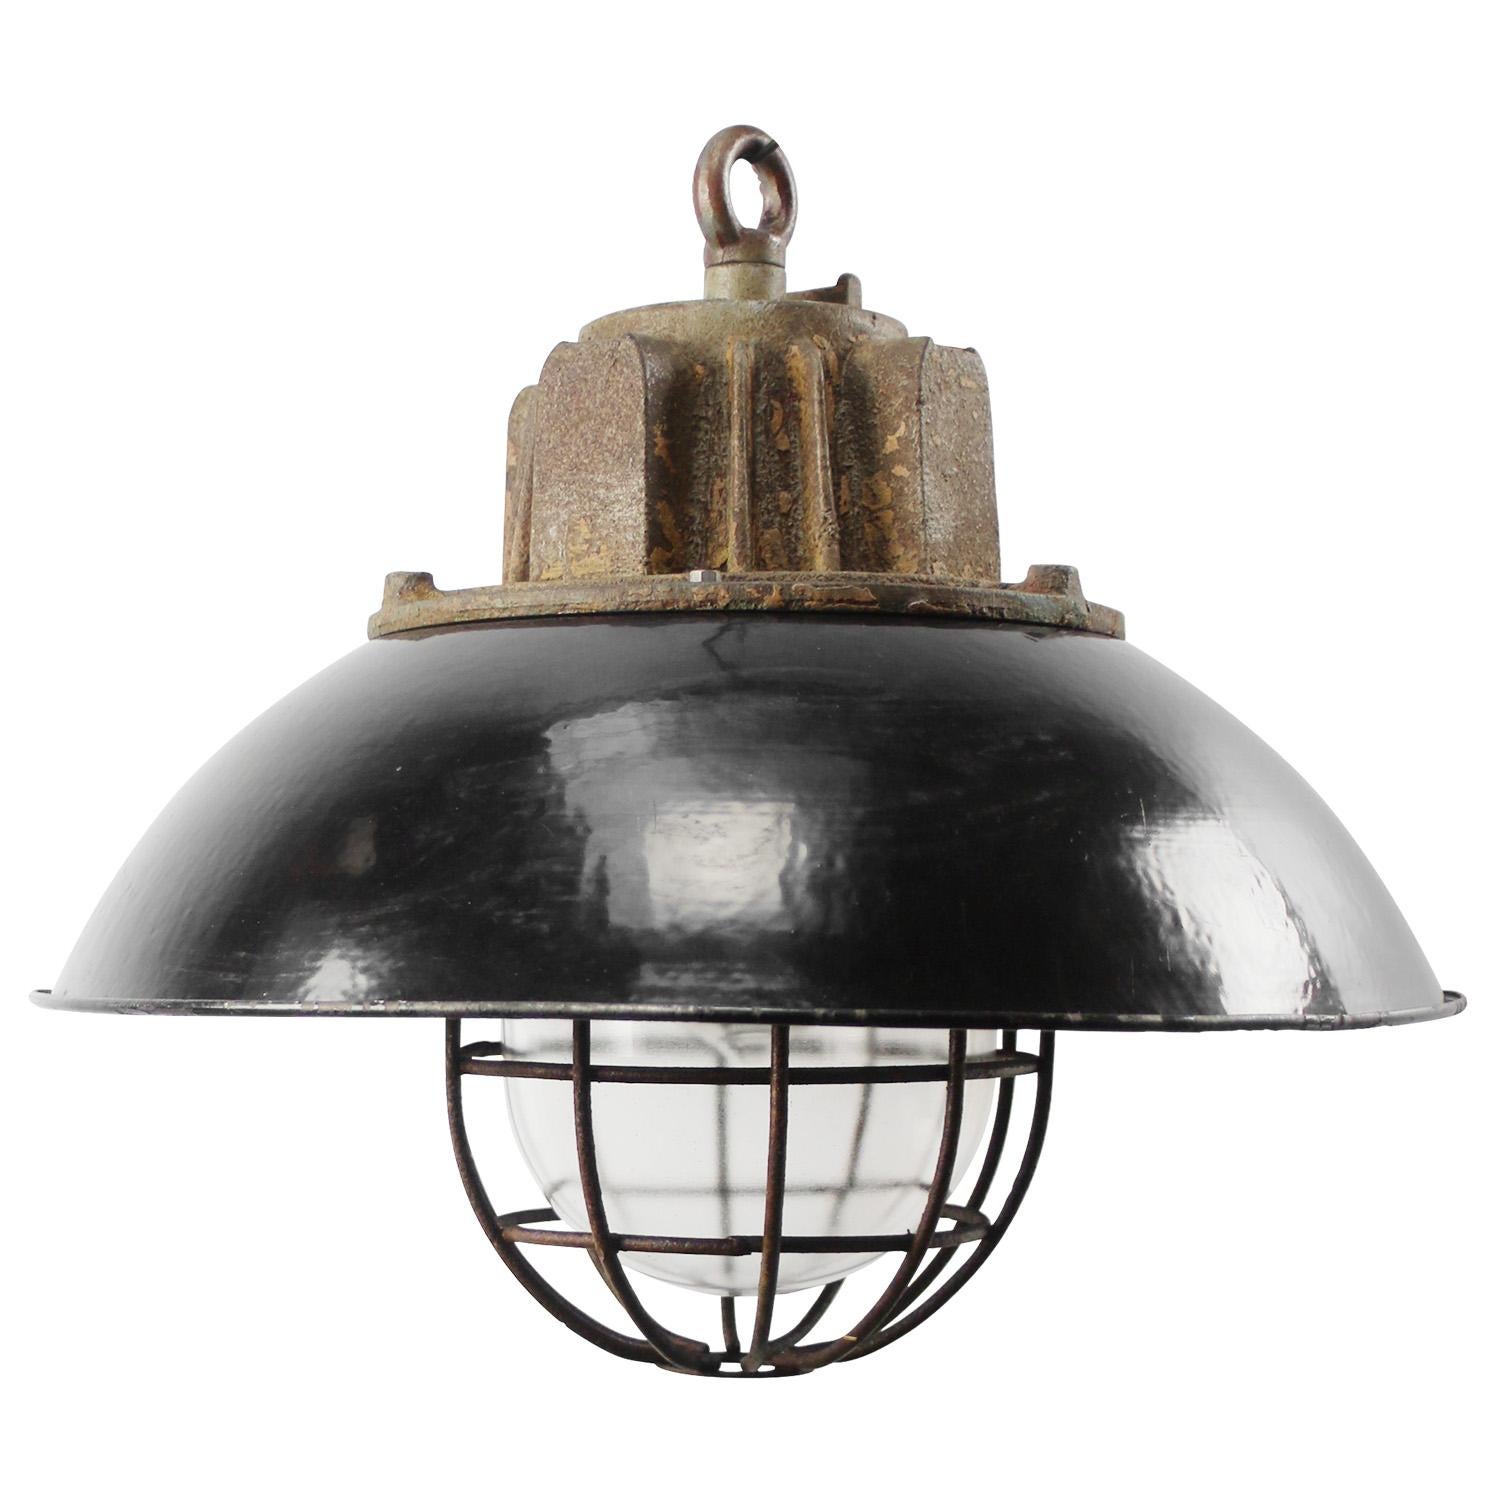 Black enamel with cast iron top
clear glass, iron cage

Weight: 9.00 kg / 19.8 lb

Priced per individual item. All lamps have been made suitable by international standards for incandescent light bulbs, energy-efficient and LED bulbs. E26/E27 bulb